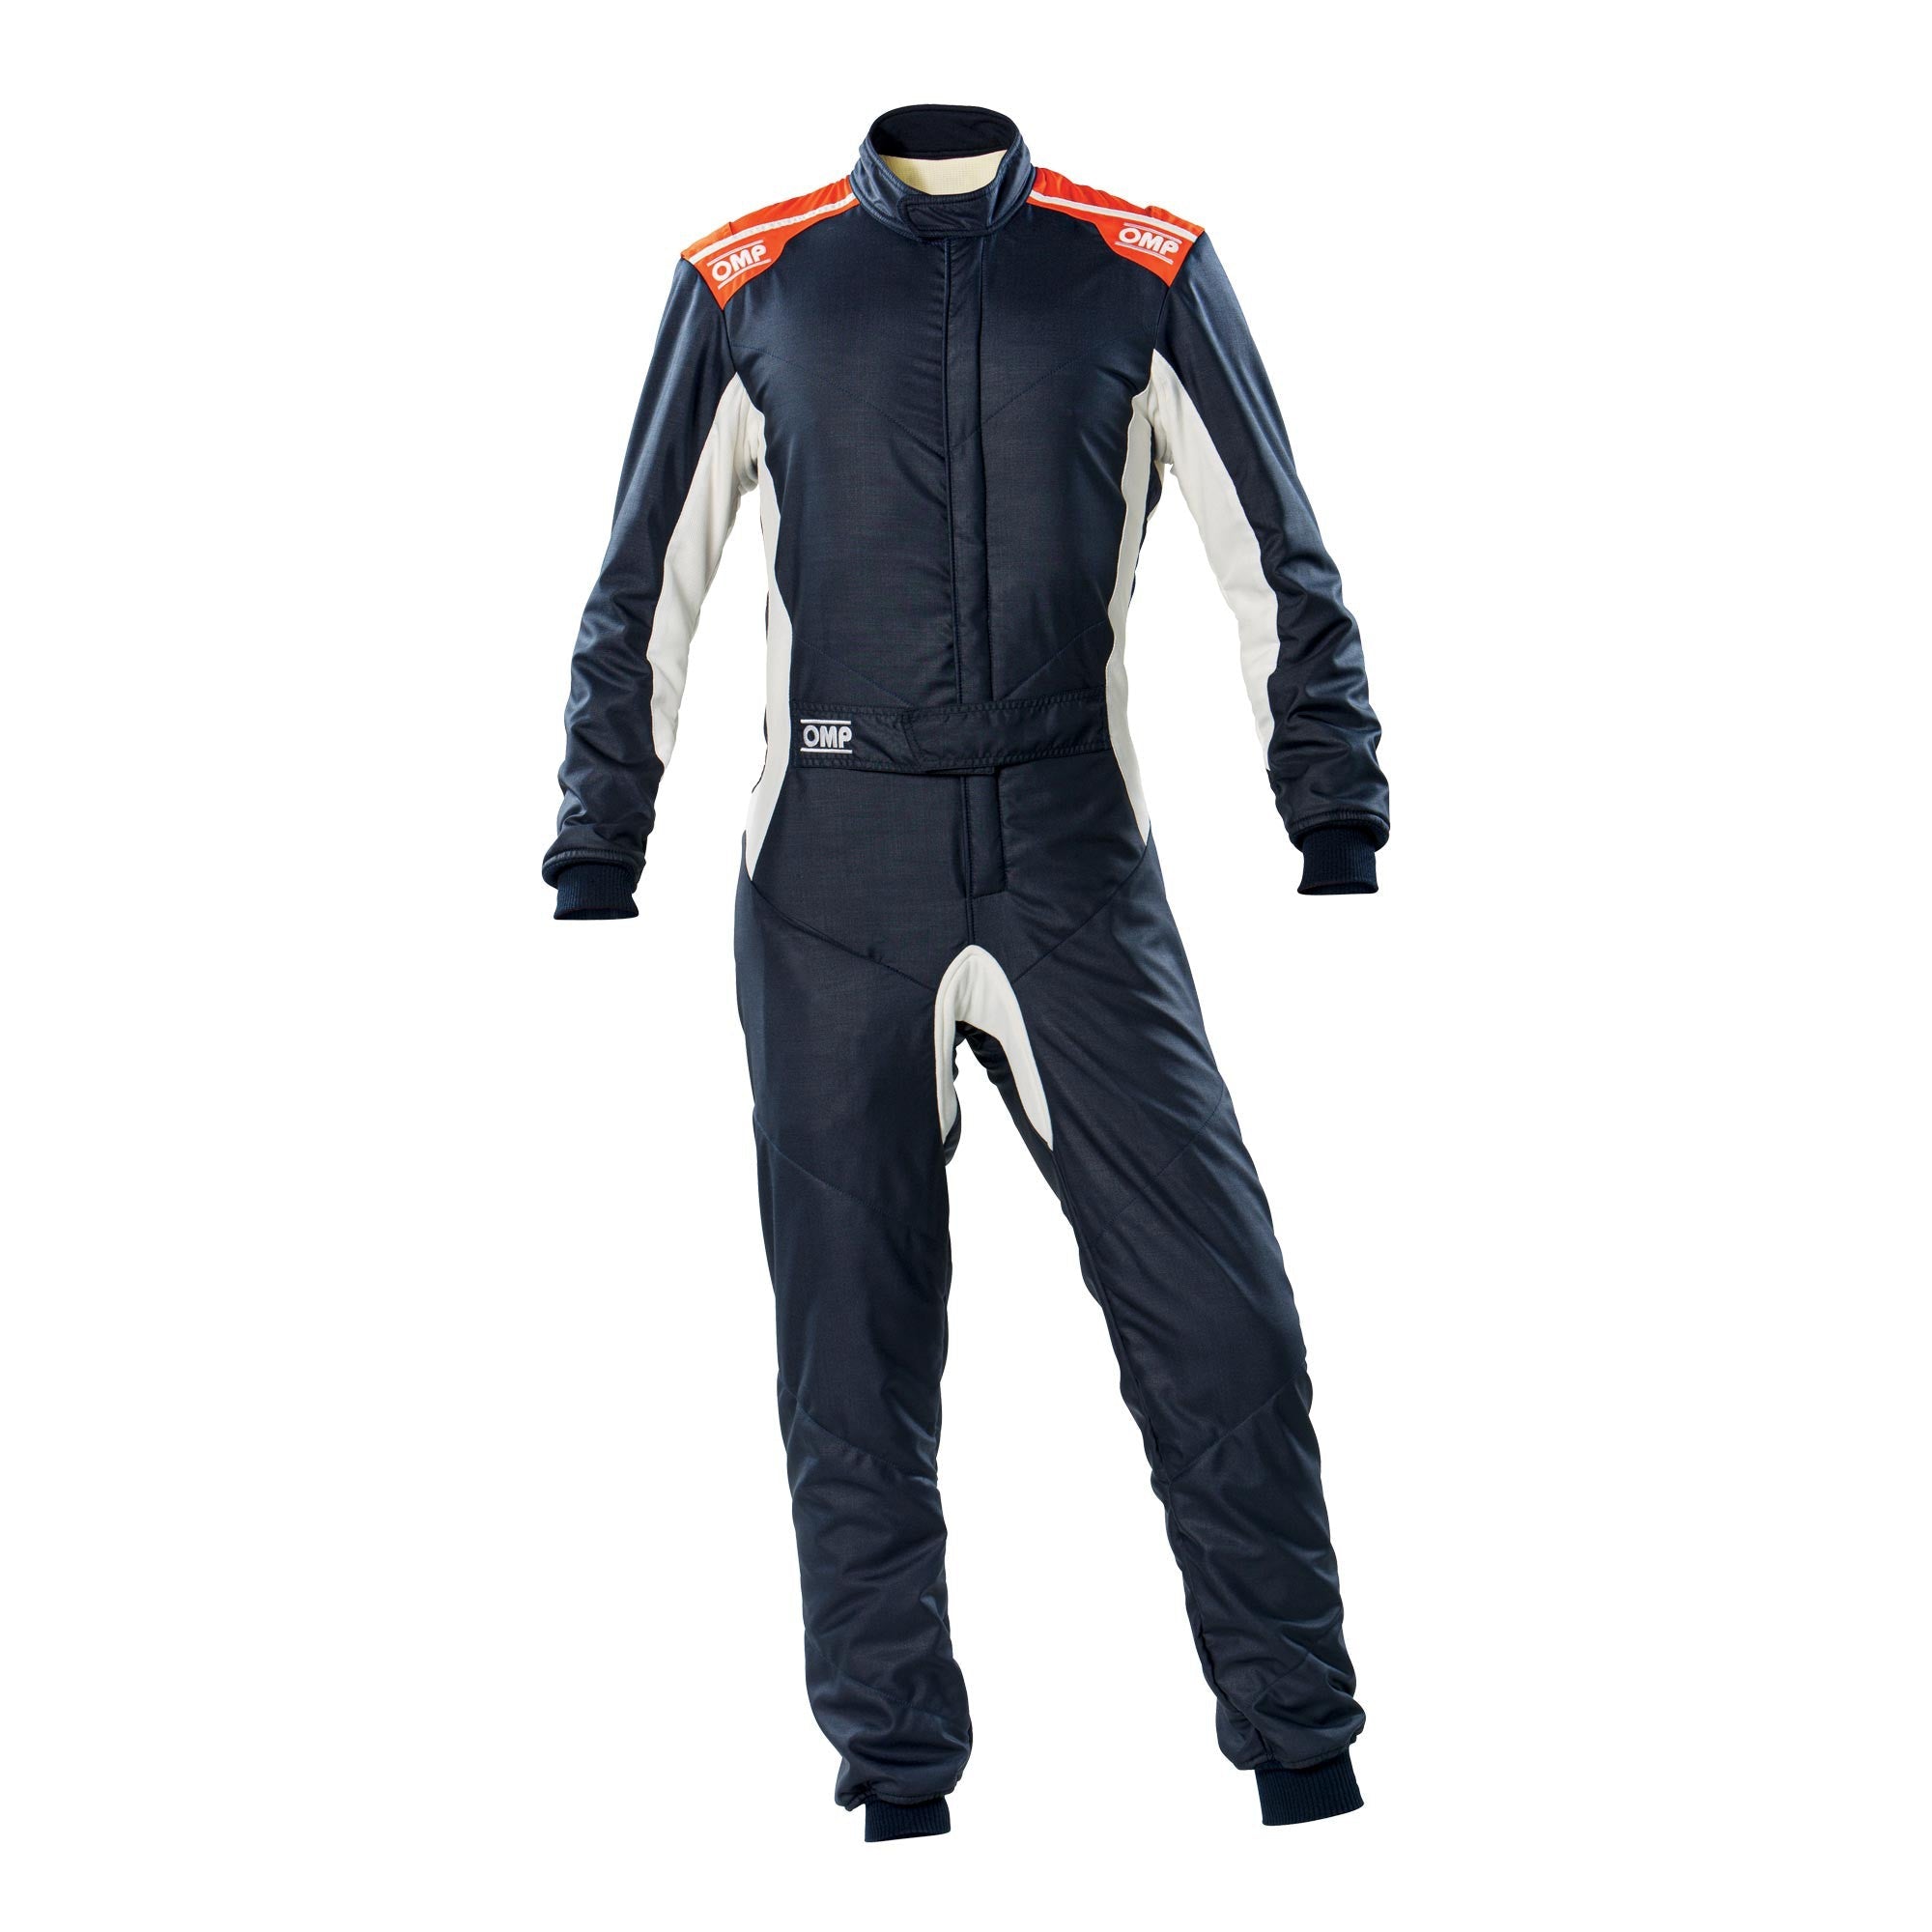 OMP One-S Suit – Winding Road Racing